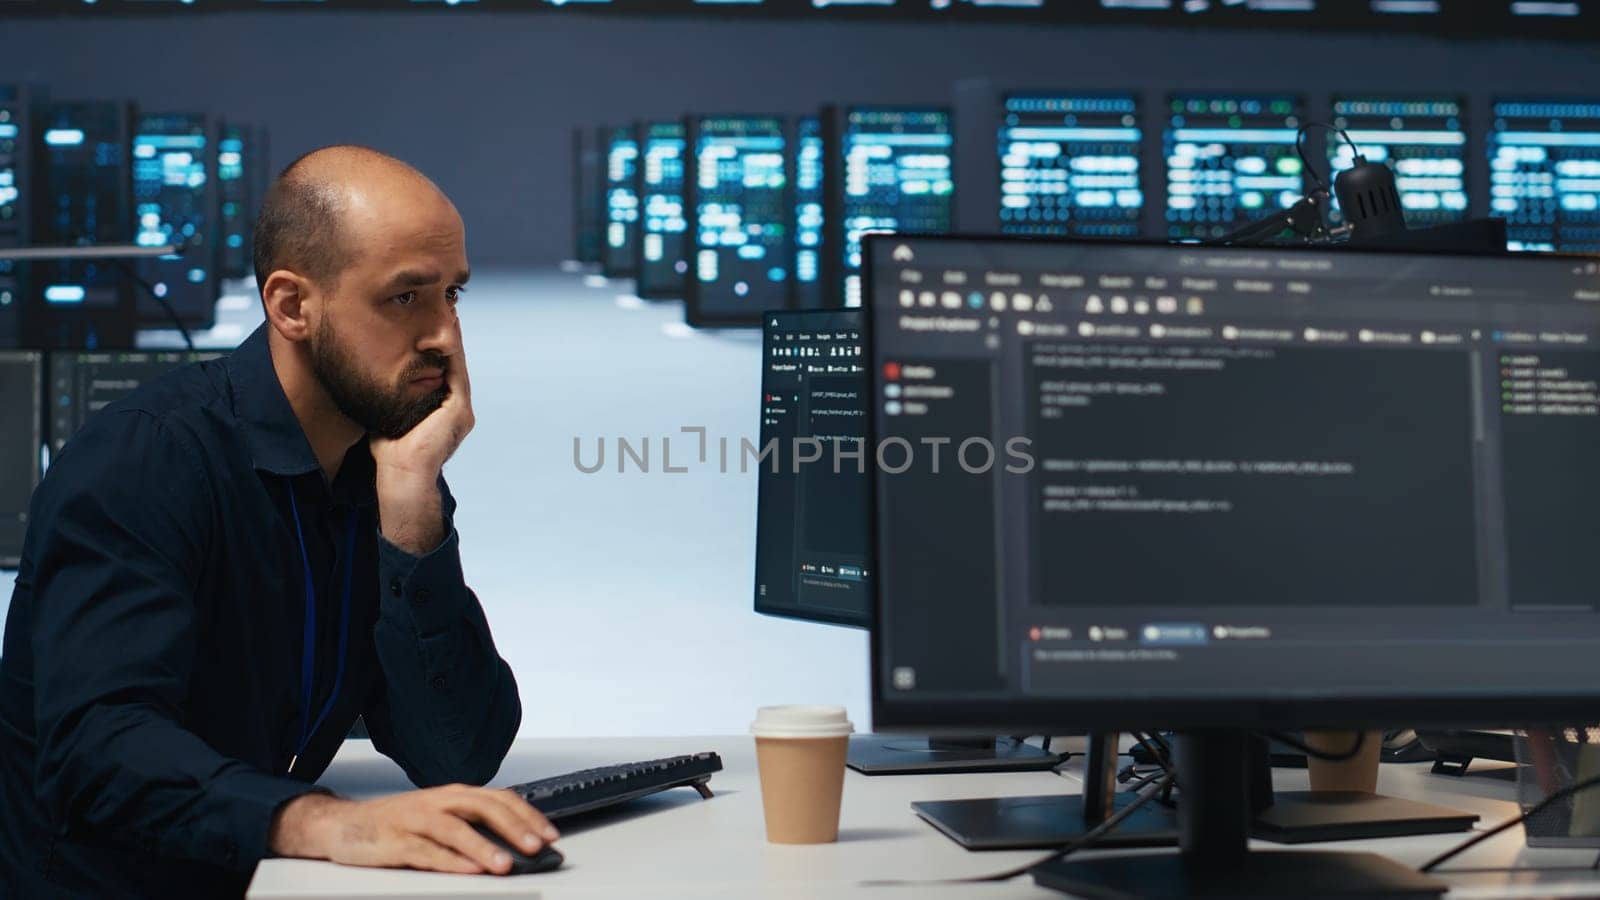 Technician using PC in high tech server hub facility to safeguard data from intruding hackers. Engineer protecting blade servers against unauthorized access, securing system from malicious traffic